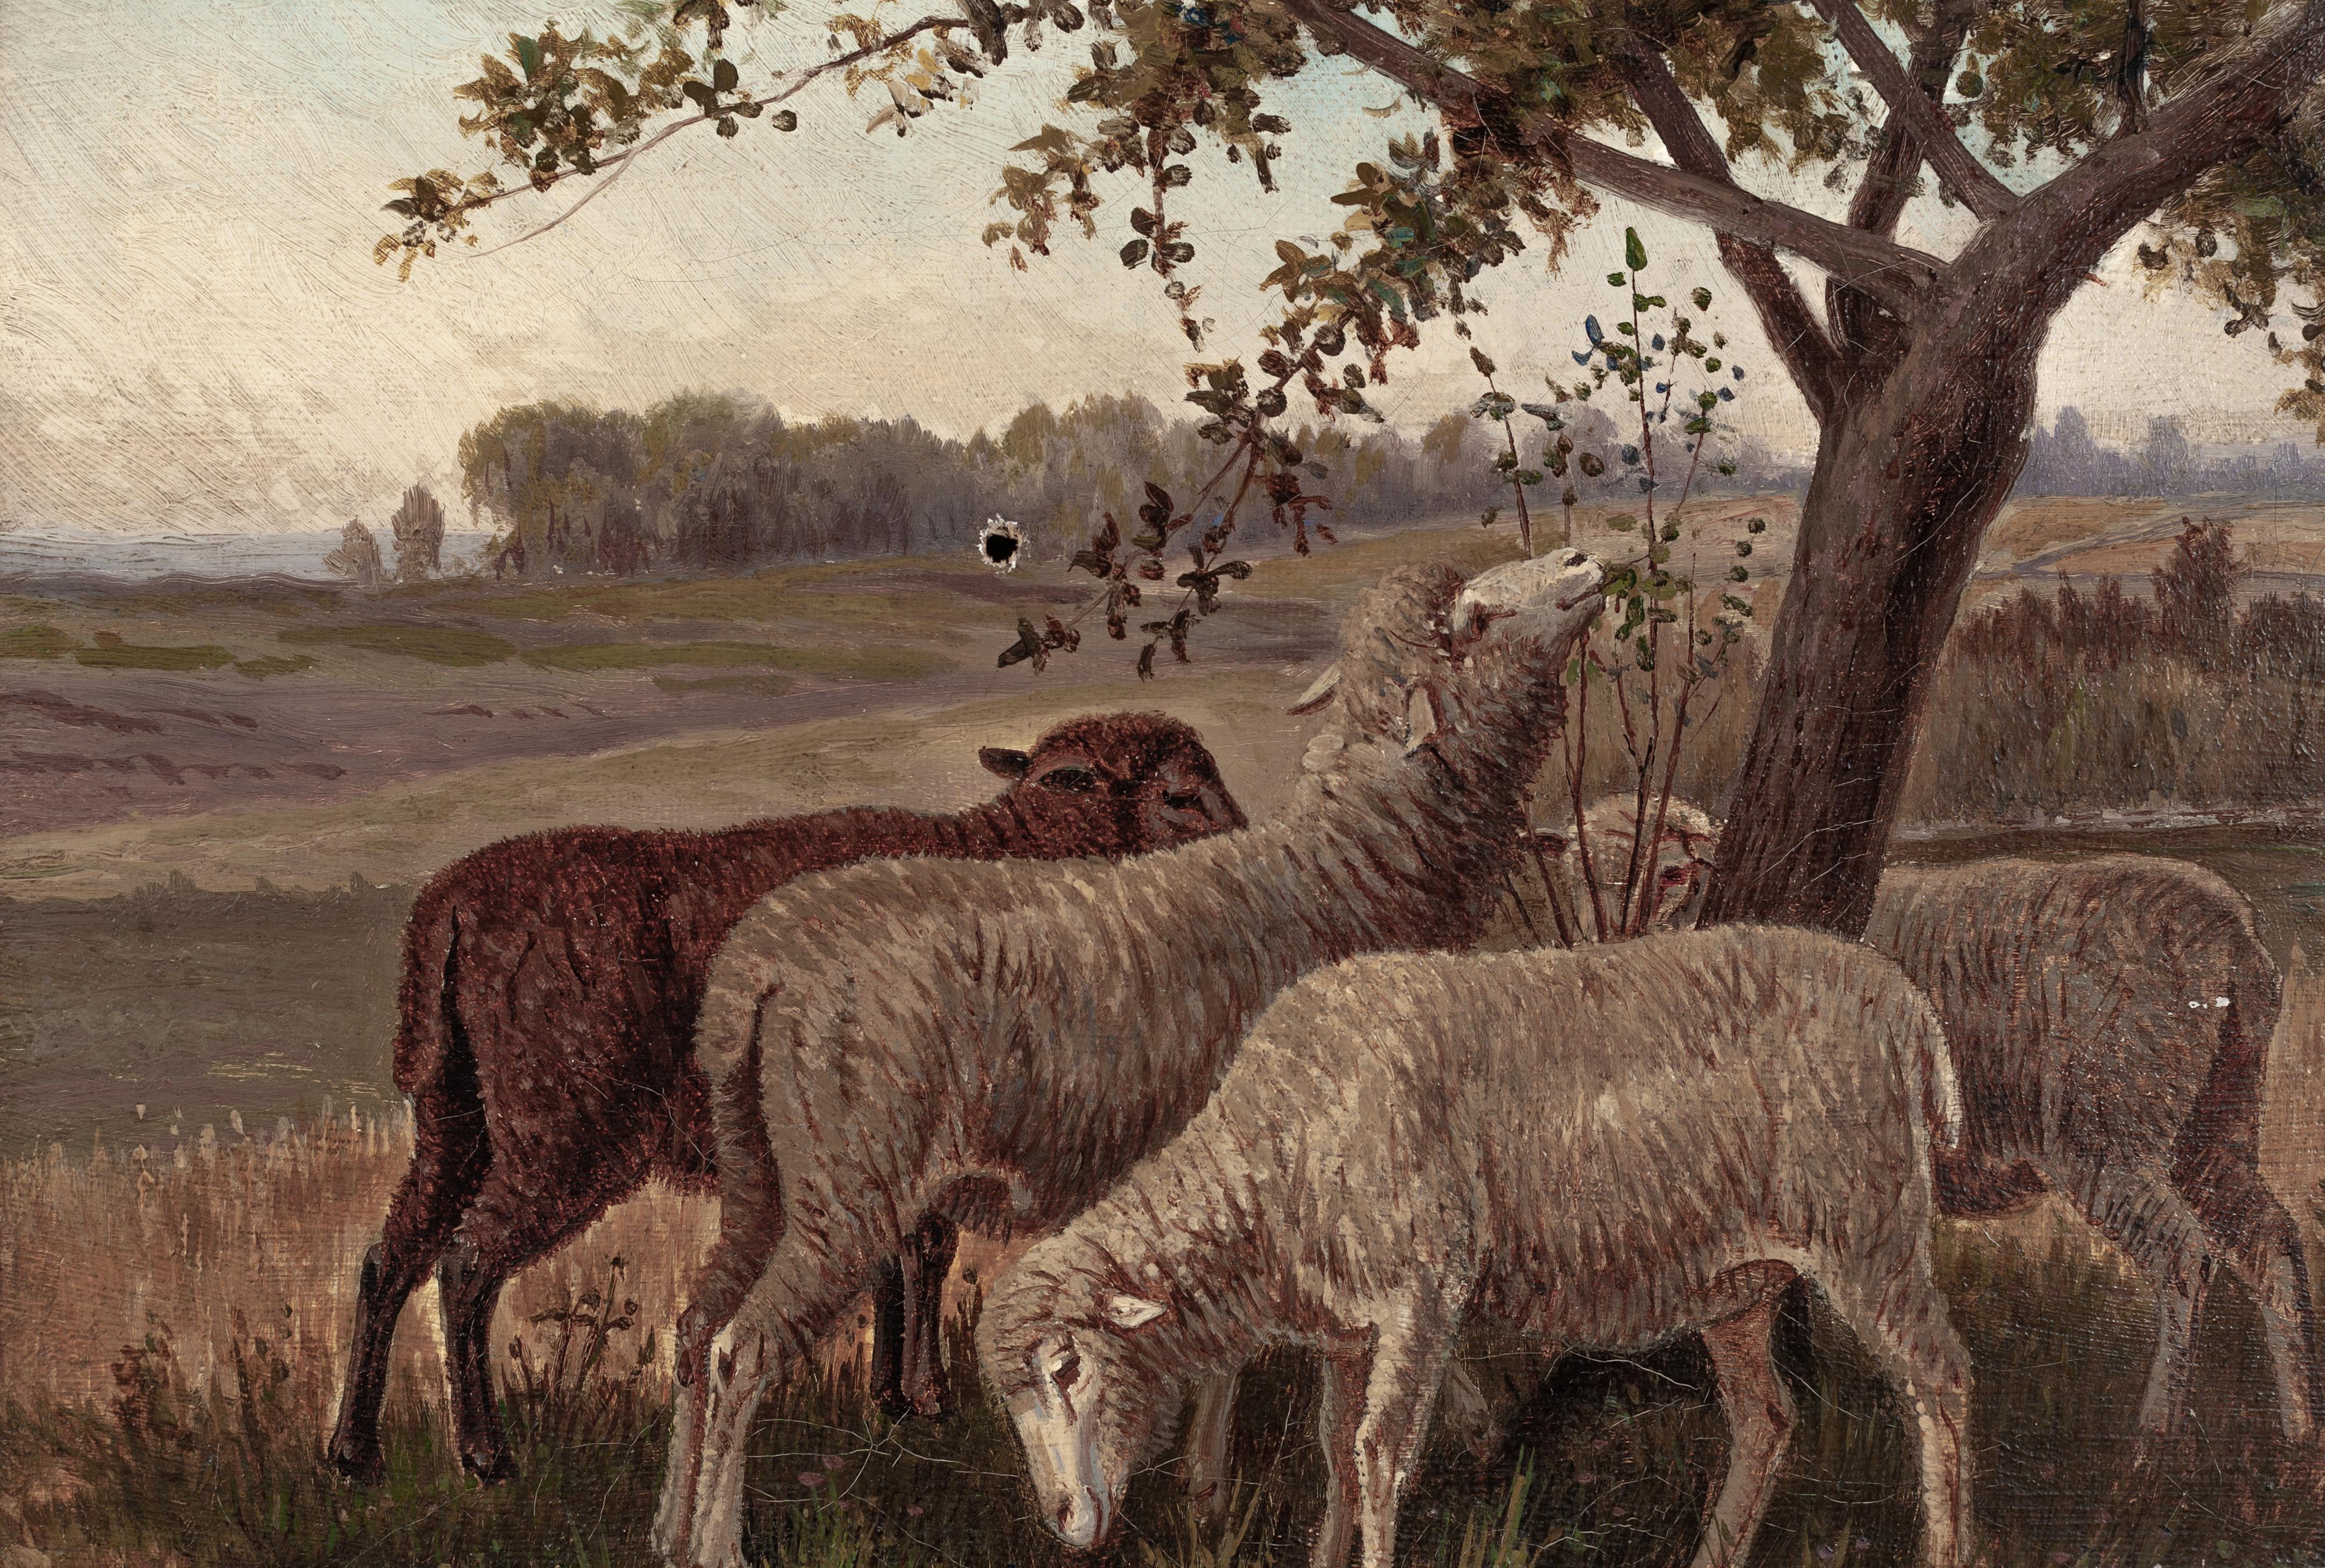 Sheep Under Tree - Painting by Frank Selzer